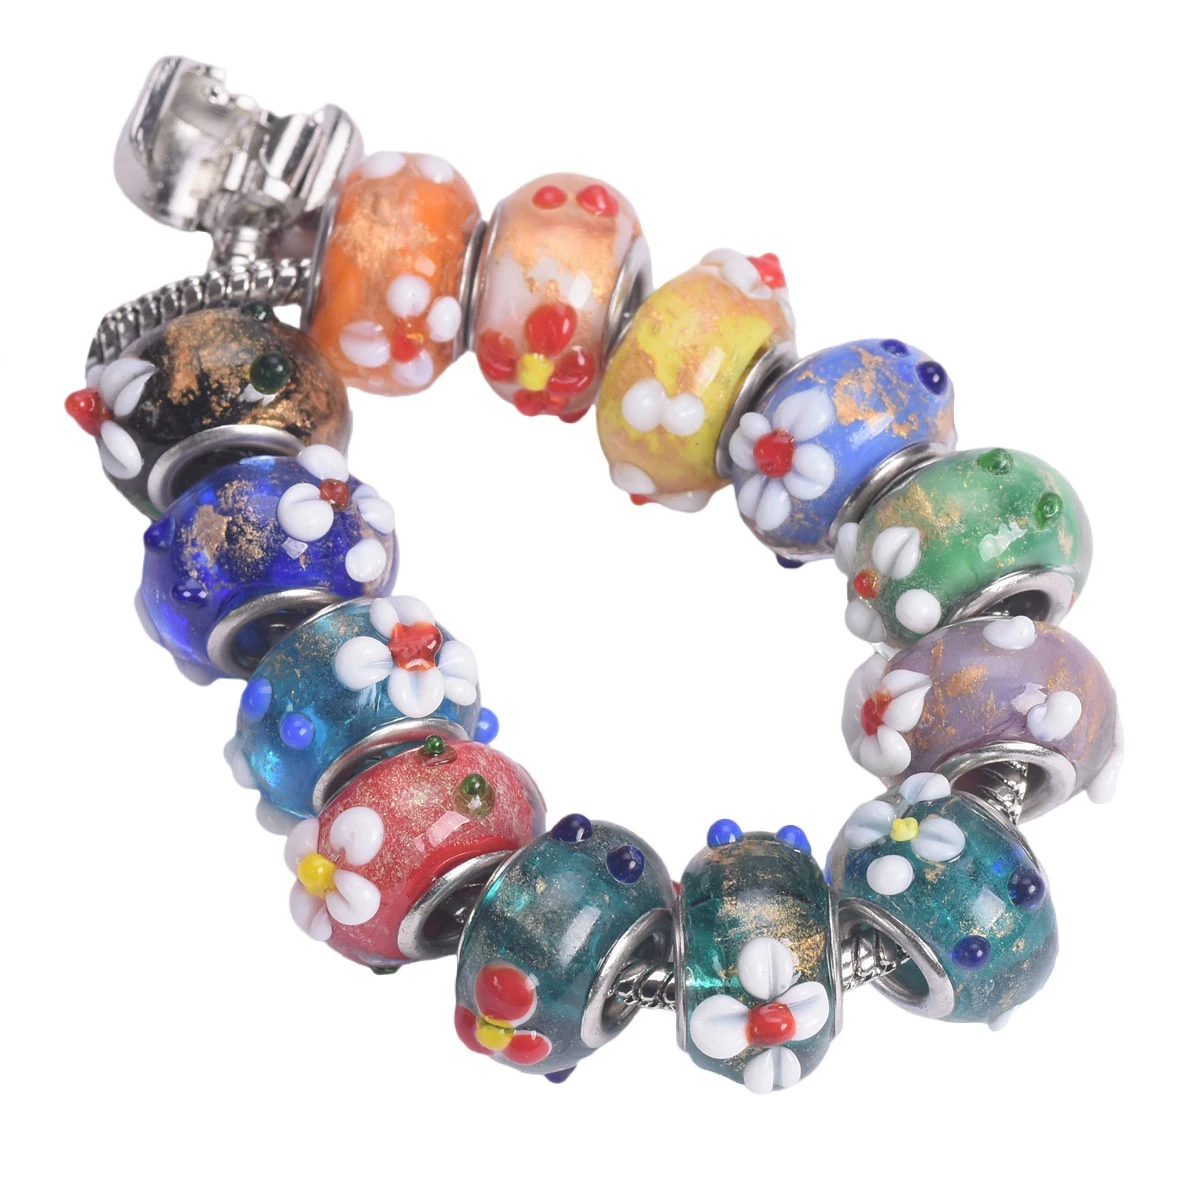 10pcs 15x9mm Round European Flower Charms Murano Lampwork Glass Big Hole Beads for Jewelry Making Bracelet DIY 1#~43#